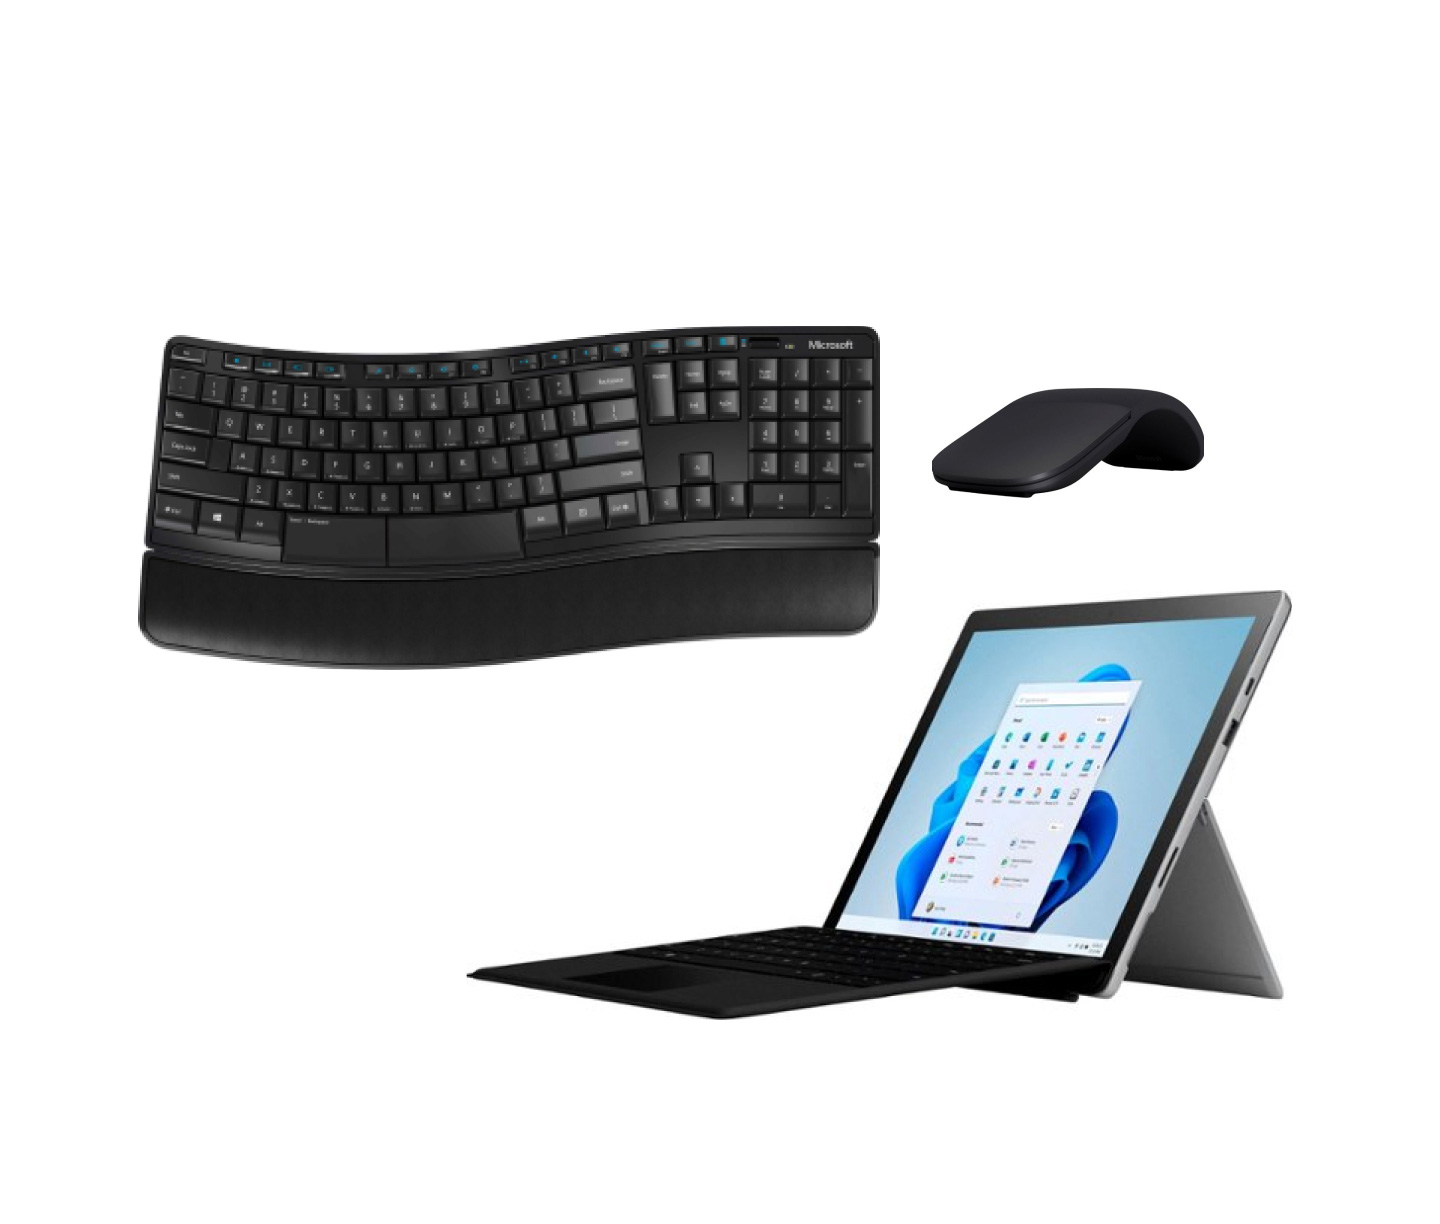 Microsoft keyboard, mouse, and Surface